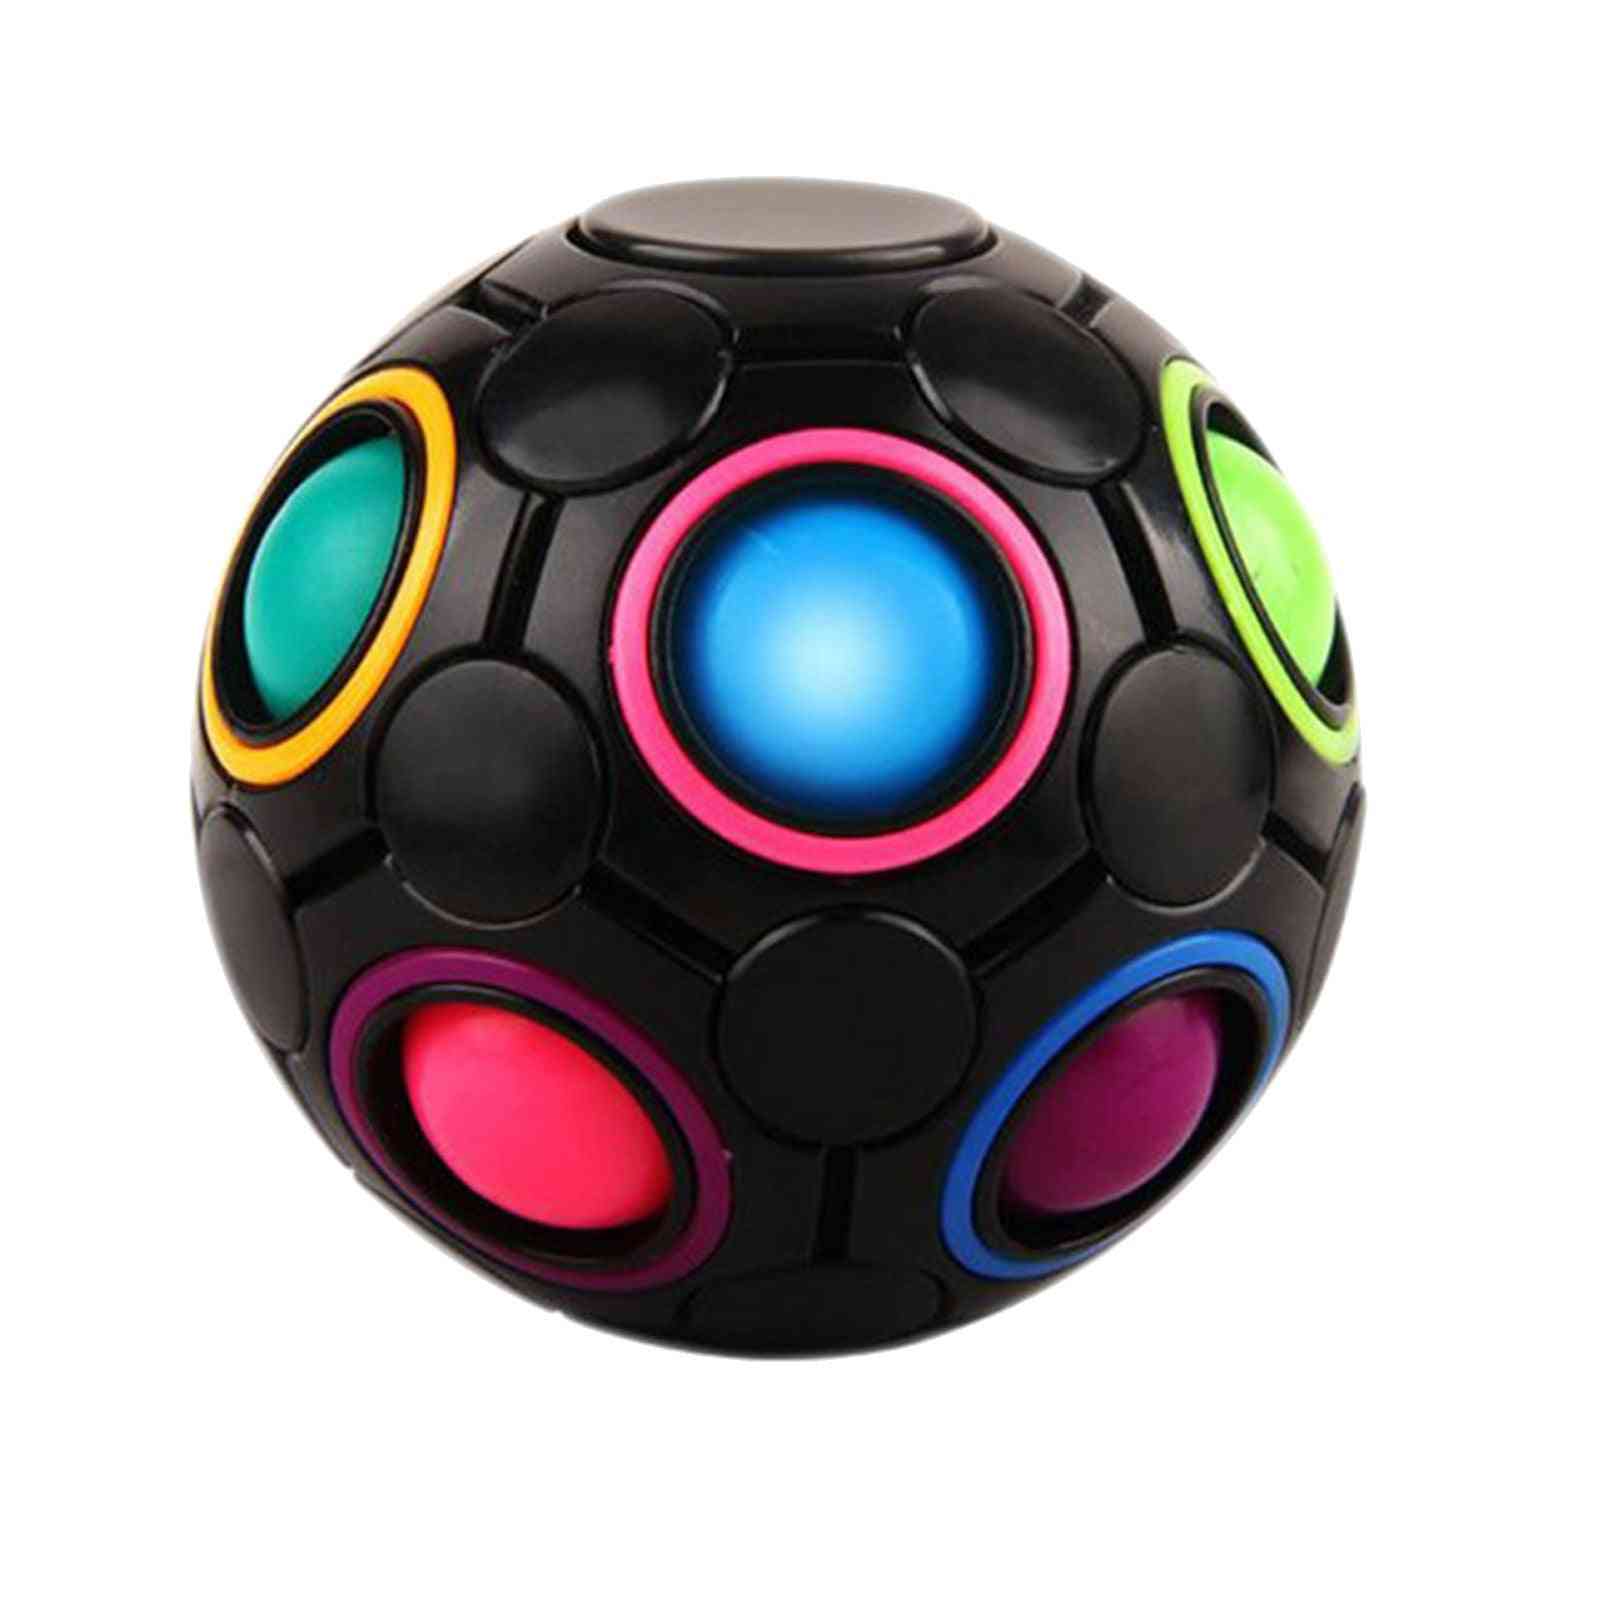 Antistress Stress Relief Cube Ball Puzzles Football